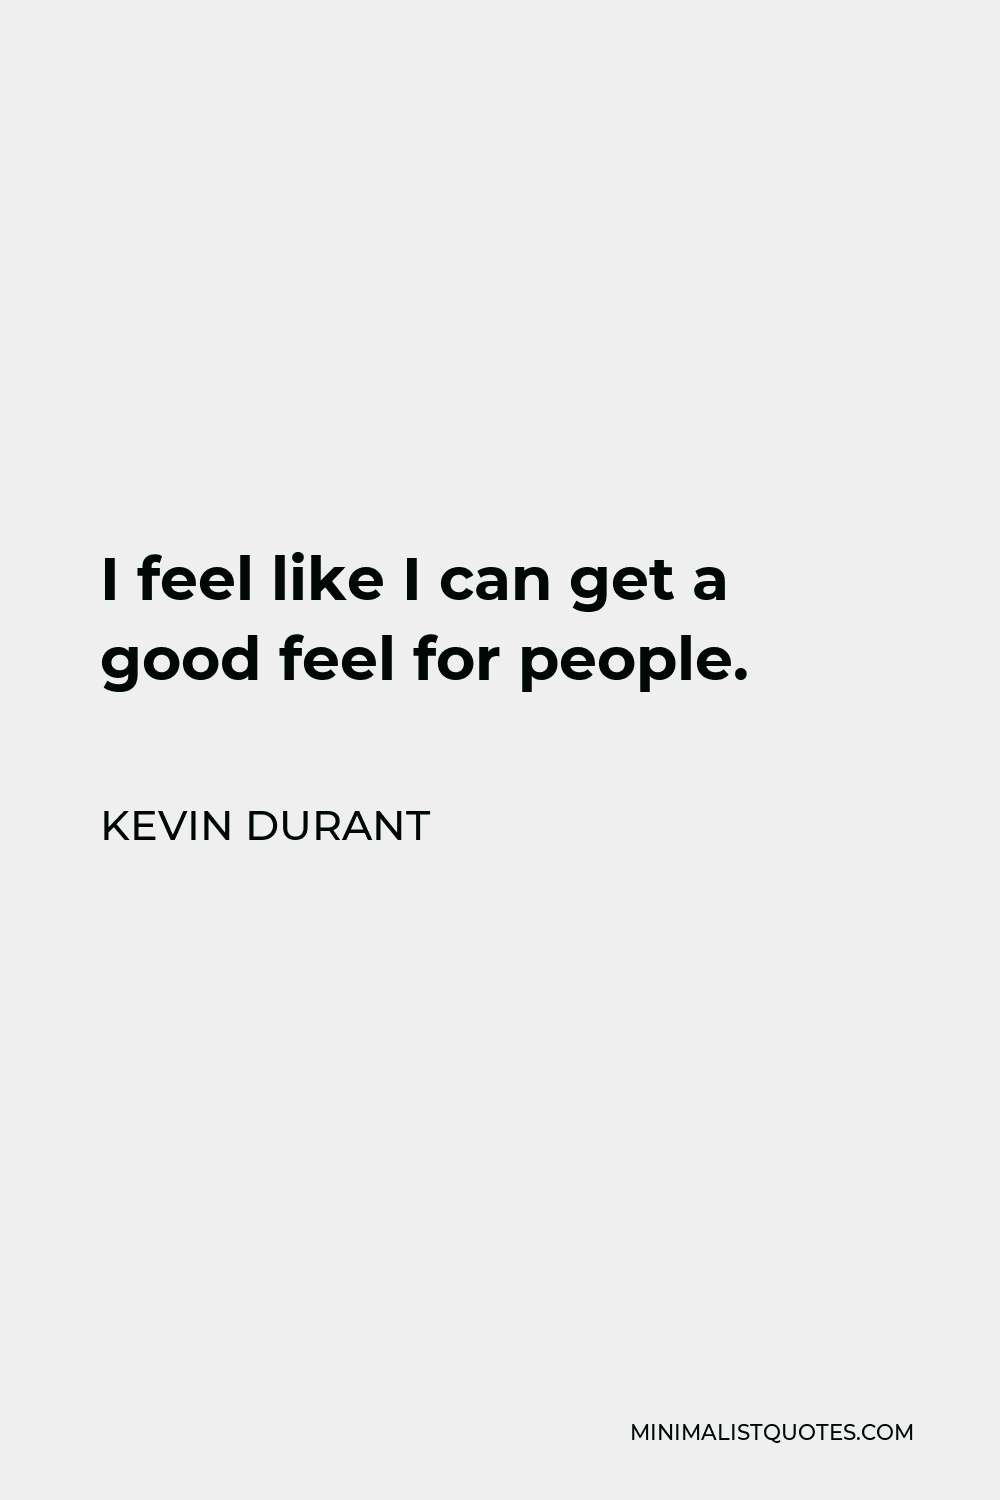 Kevin Durant Quote - I feel like I can get a good feel for people.